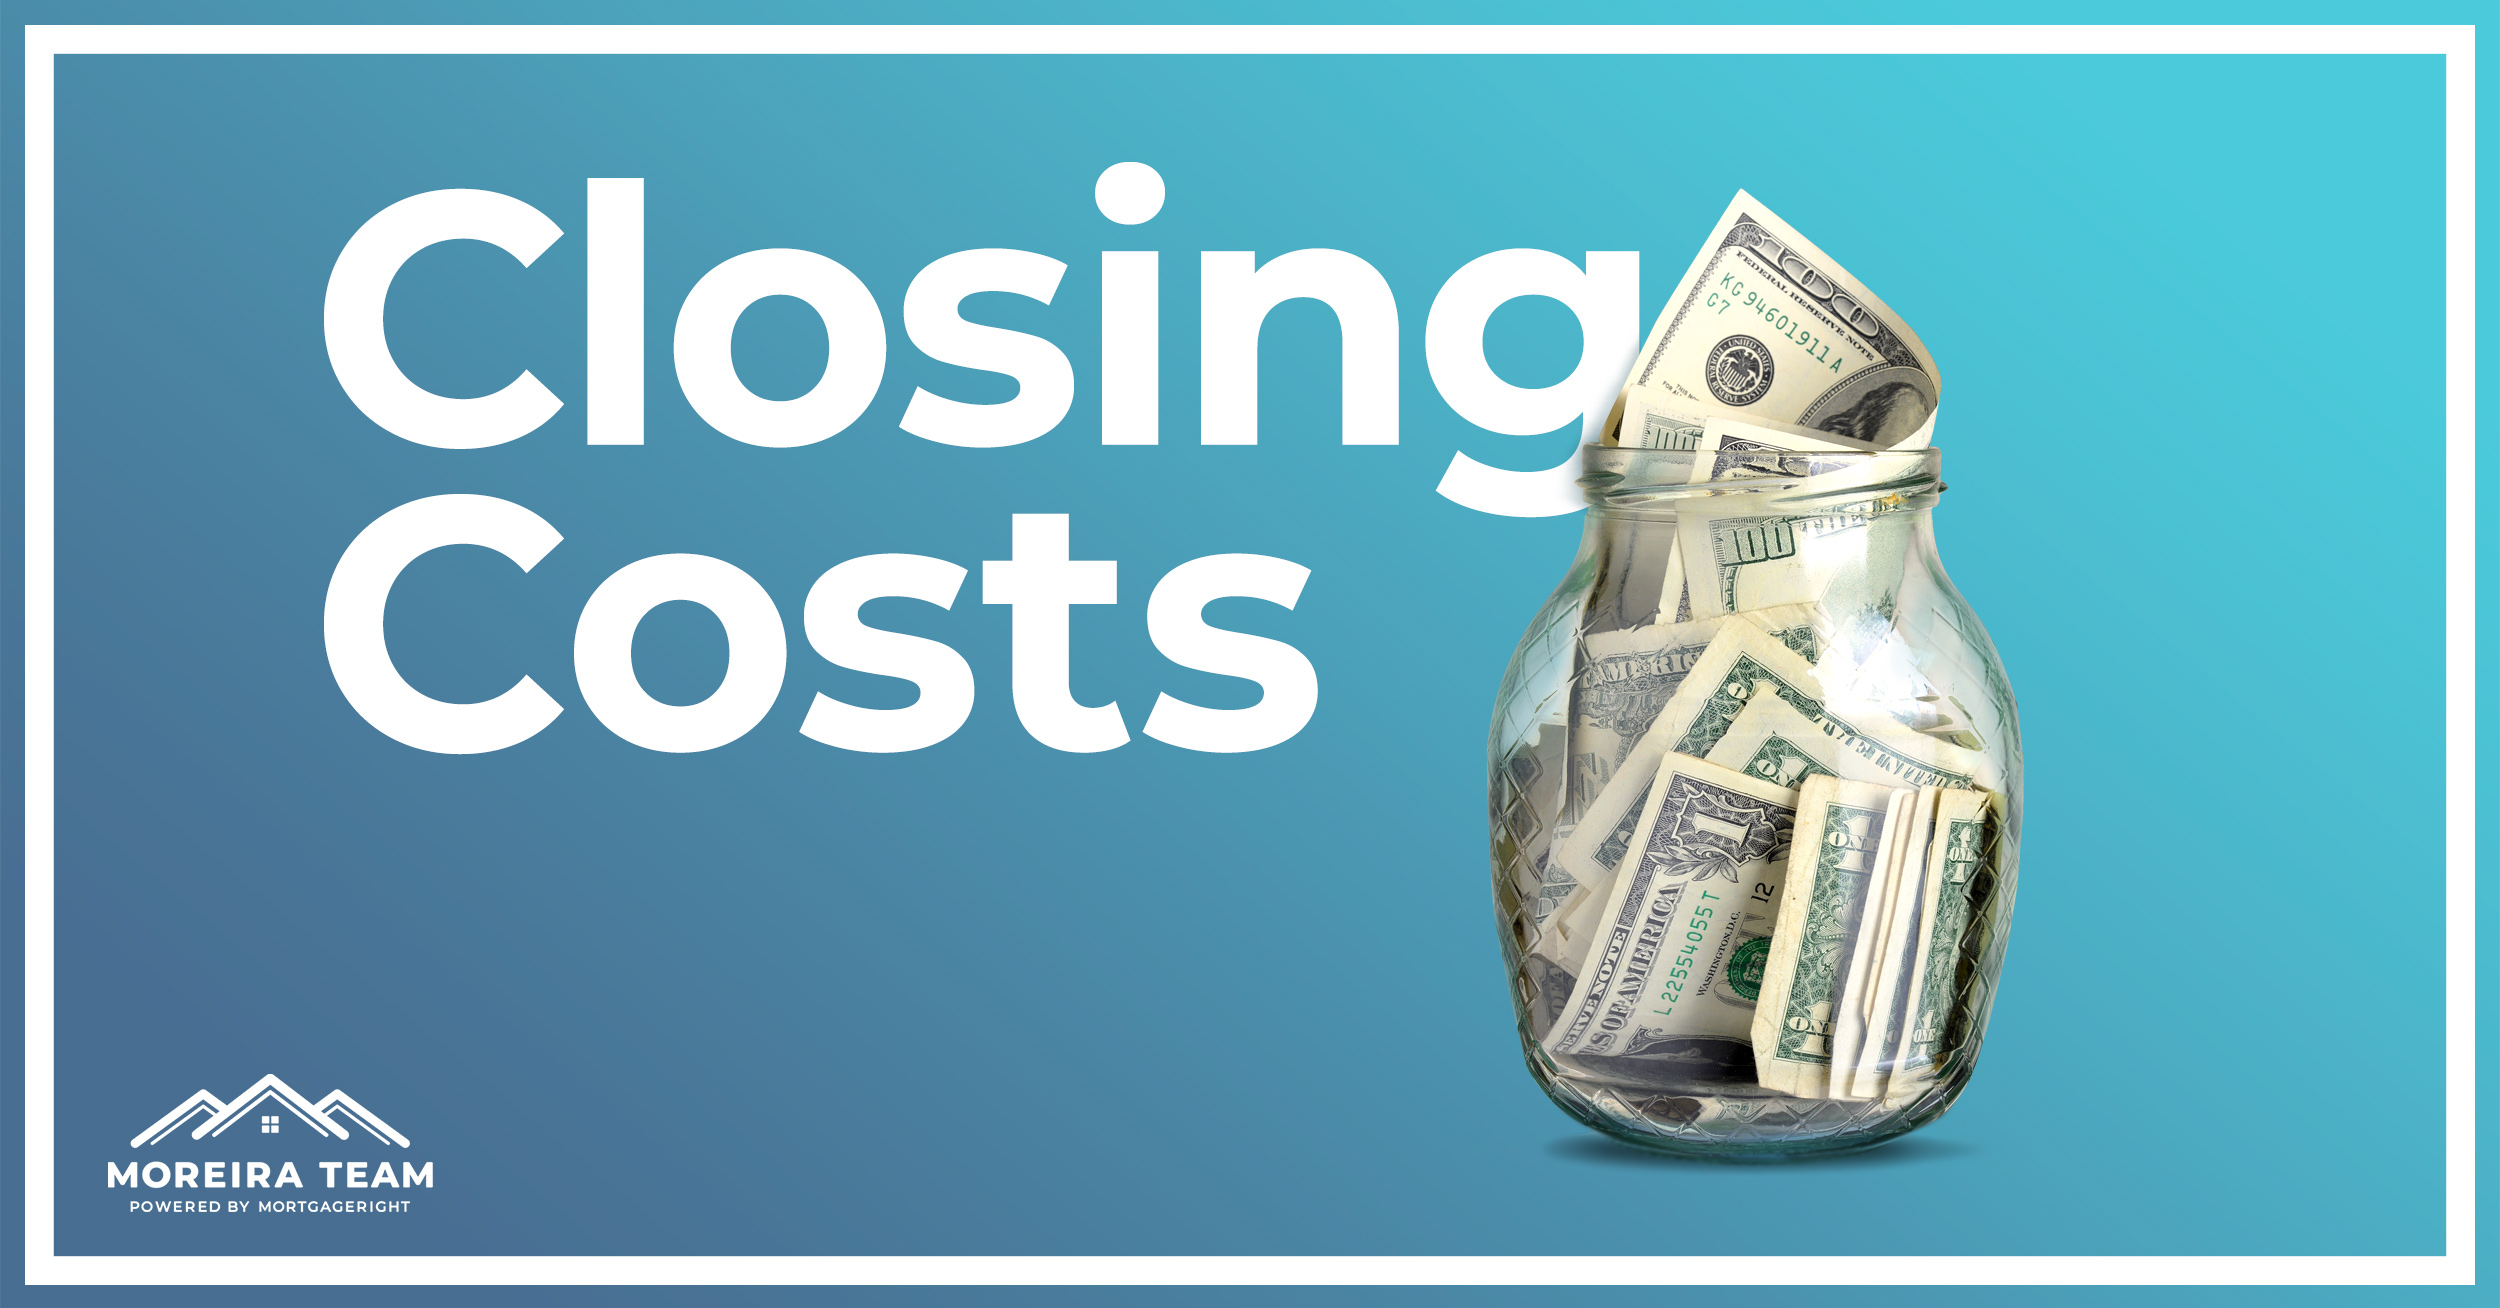 Top 3 Mortgage Closing Costs: What is the Attorney Fee for Closing on a House?